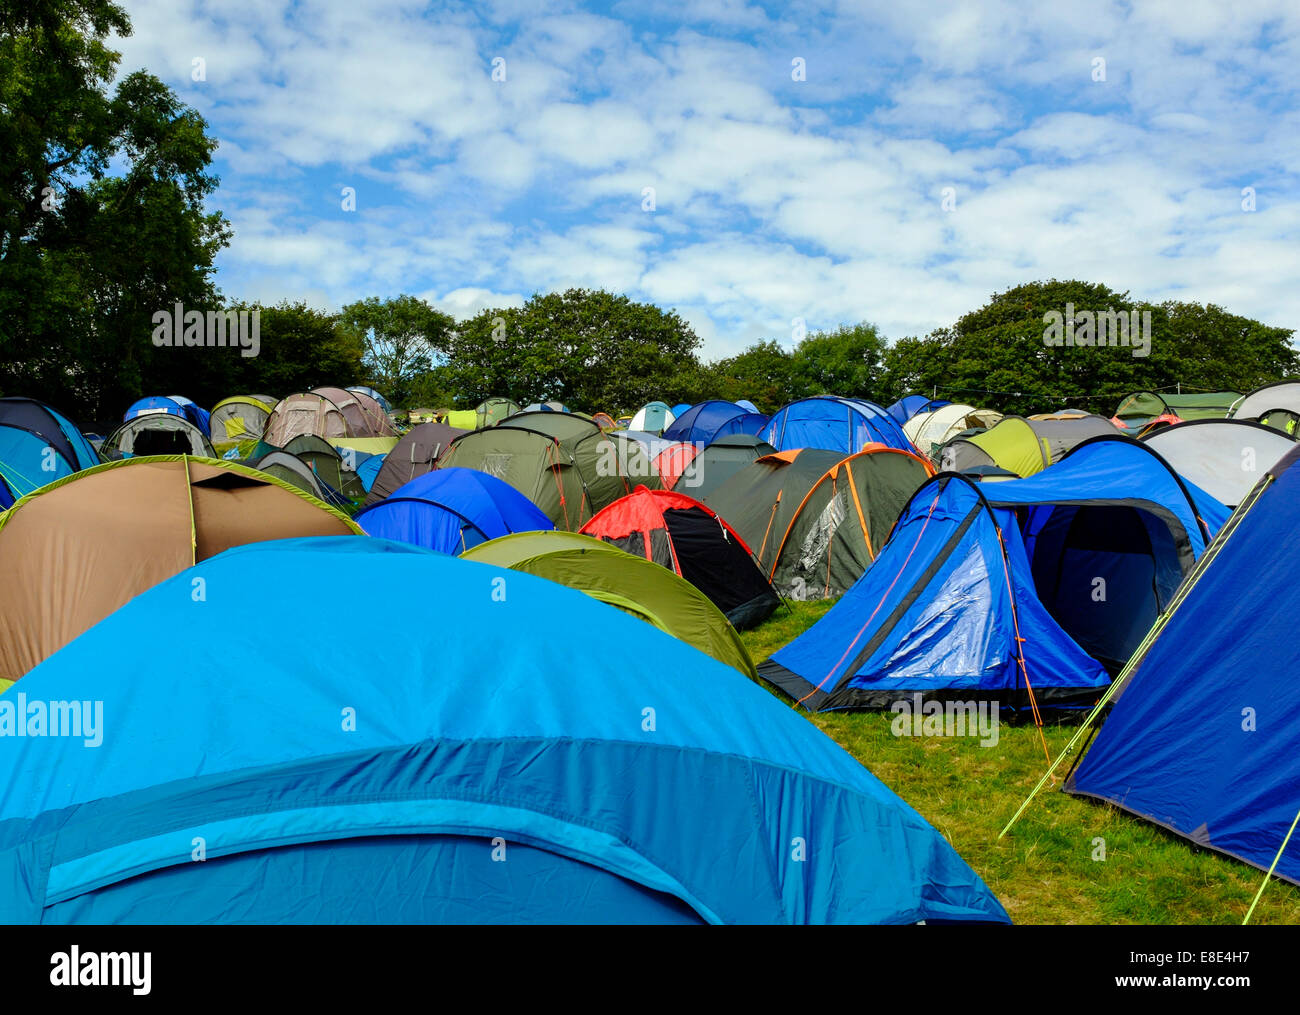 Rows of tents at the campsite - 'Festival No.6'. 6th September 2014 in Portmeirion, Wales, UK Stock Photo